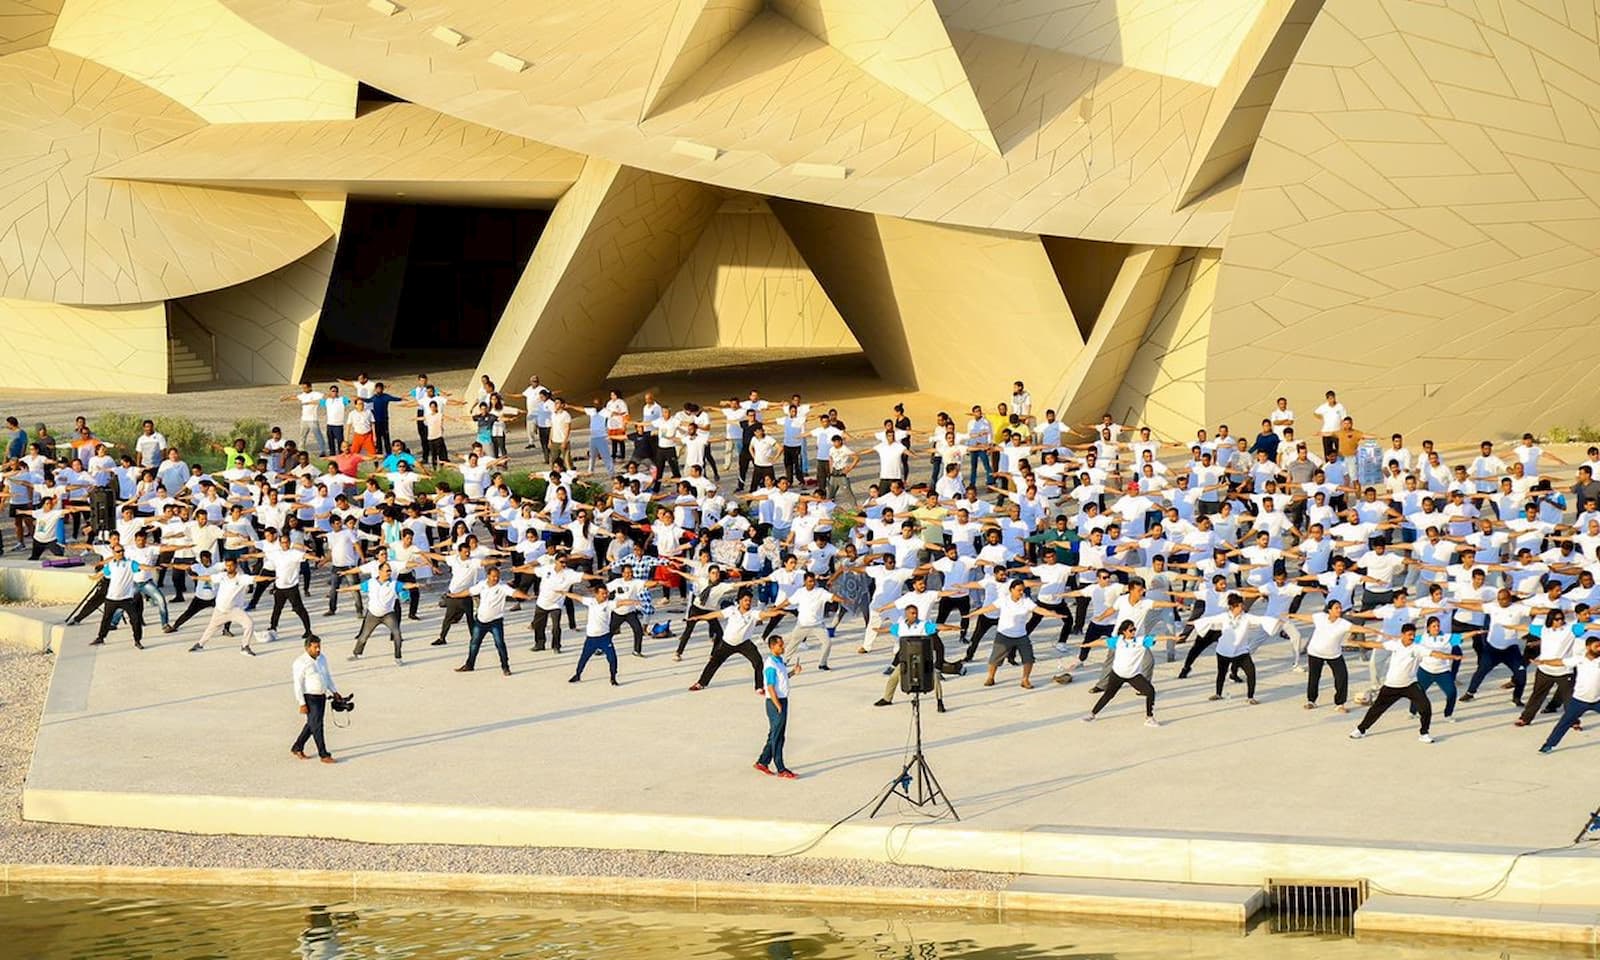 Hundreds of people take part in a yoga class for International Yoga Day at the National Museum of Qatar.